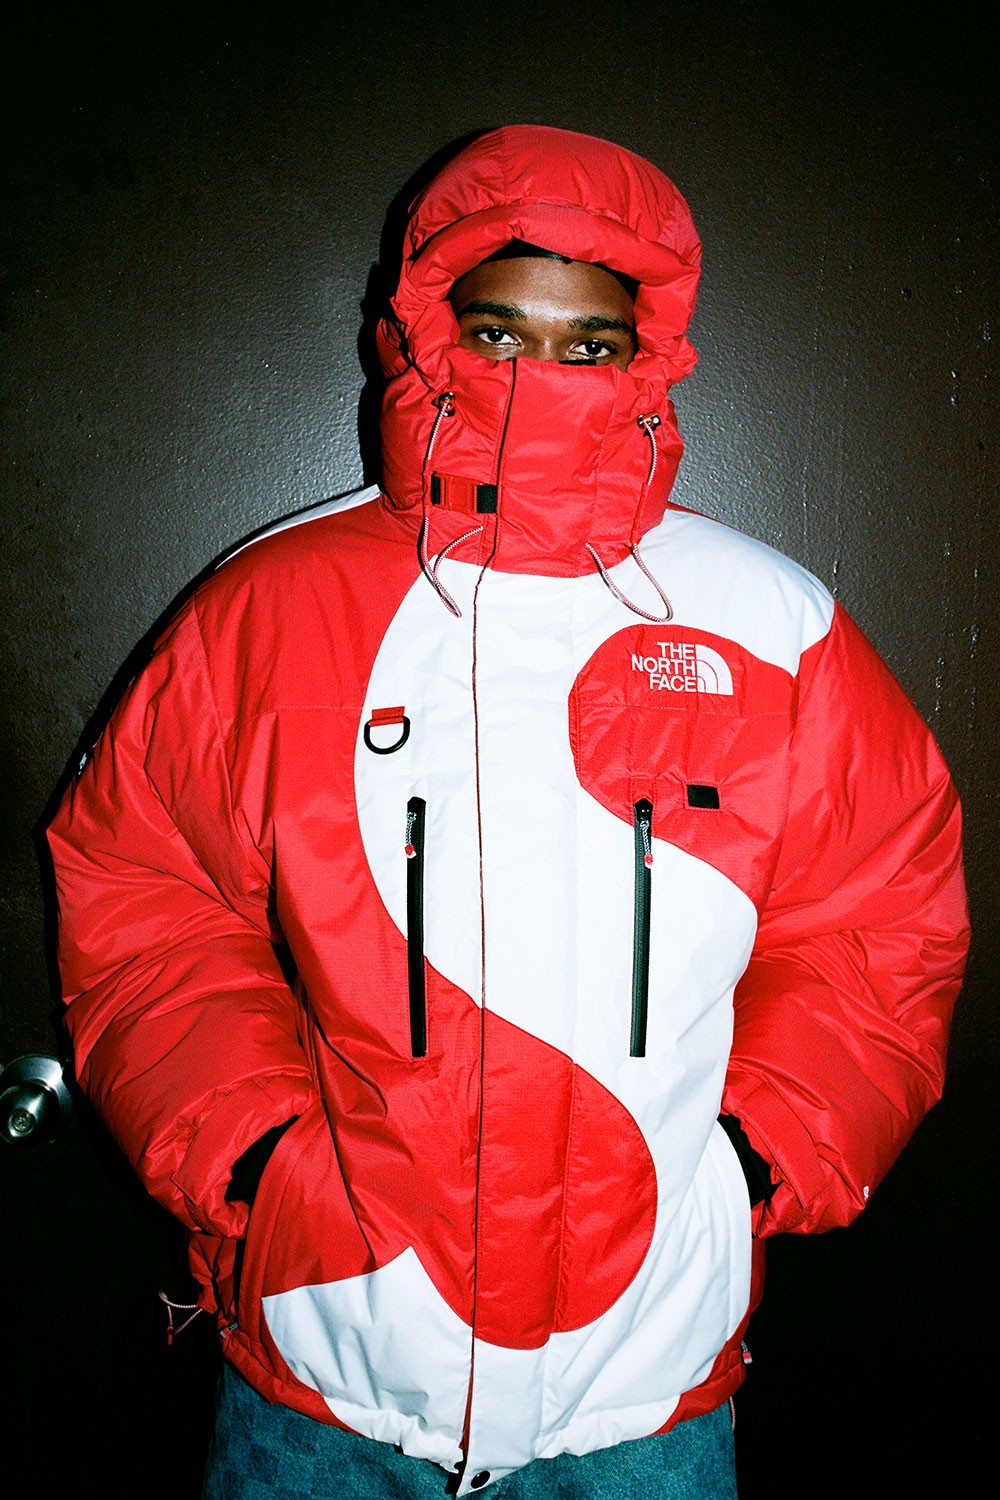 Https  sneakerspirit.com collab Supreme The North Face FW20 release 22